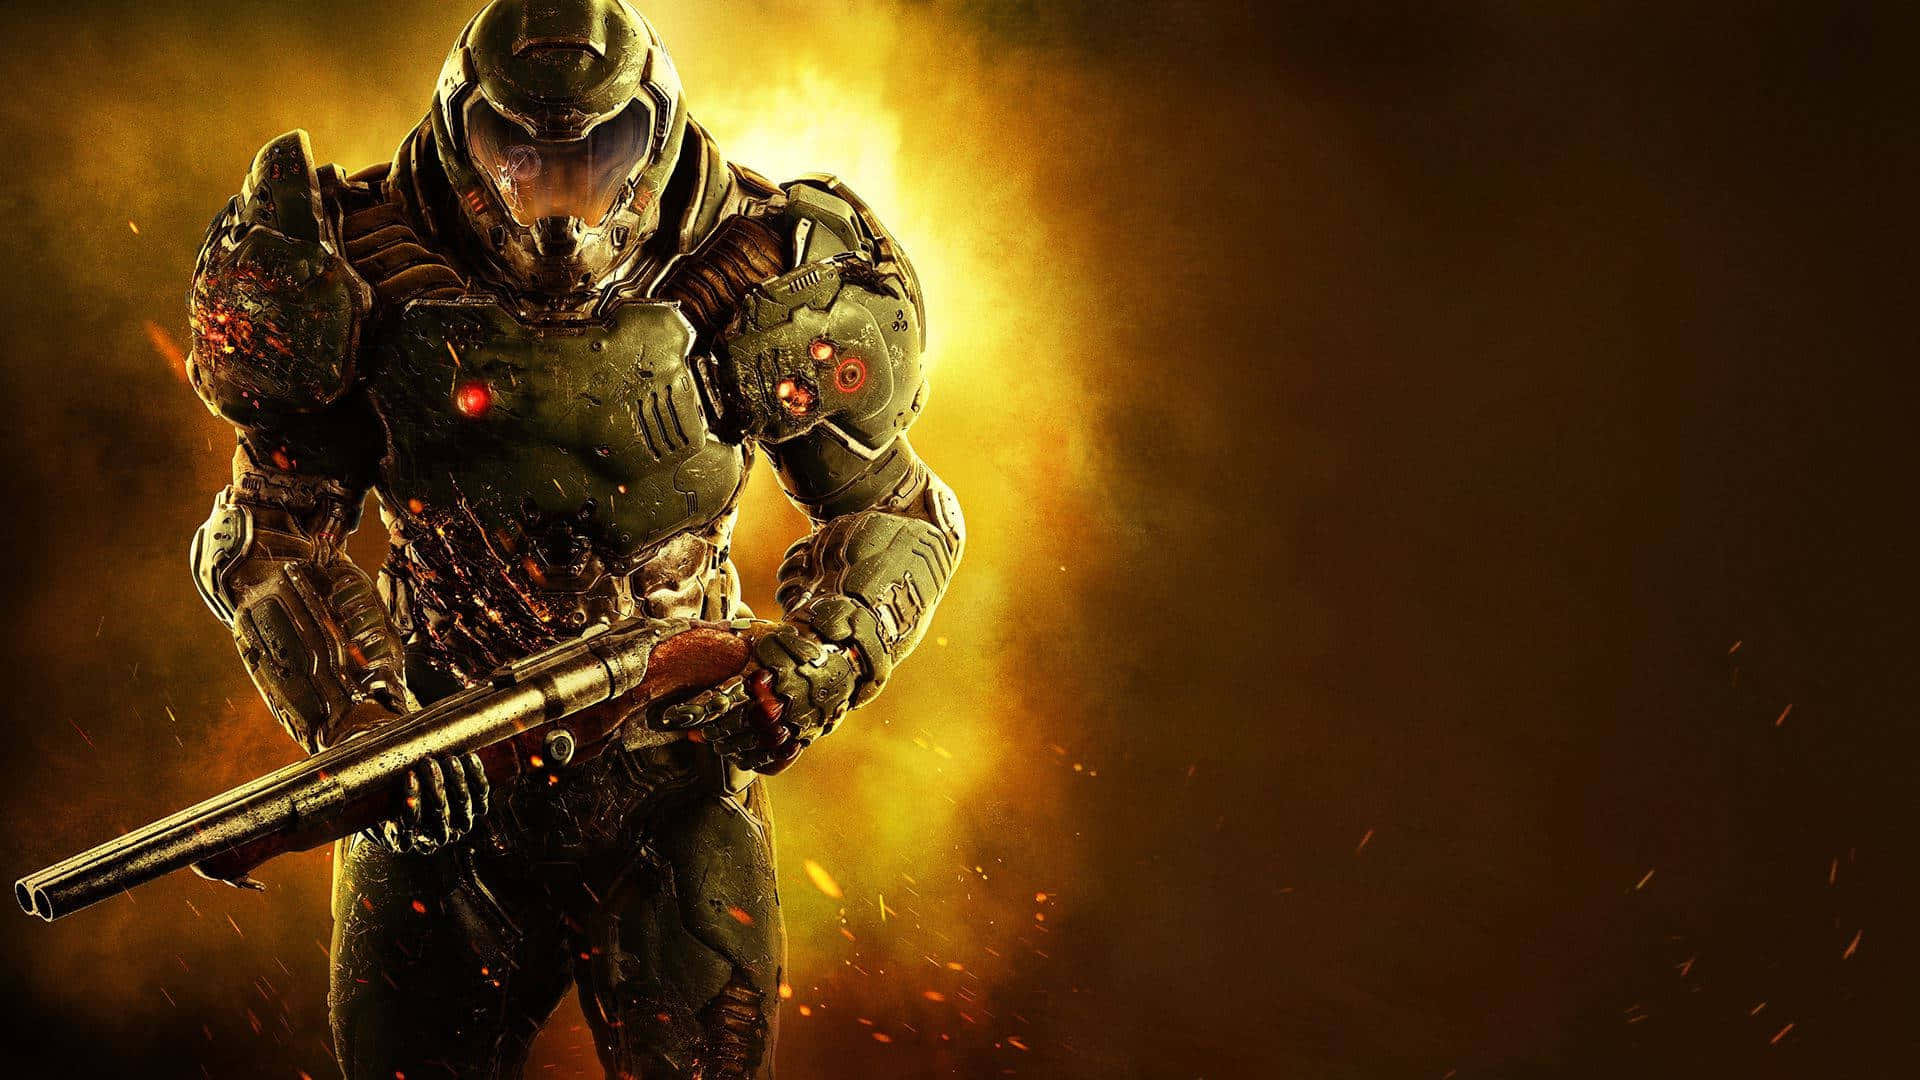 Doom Slayer In Armored Suit Background